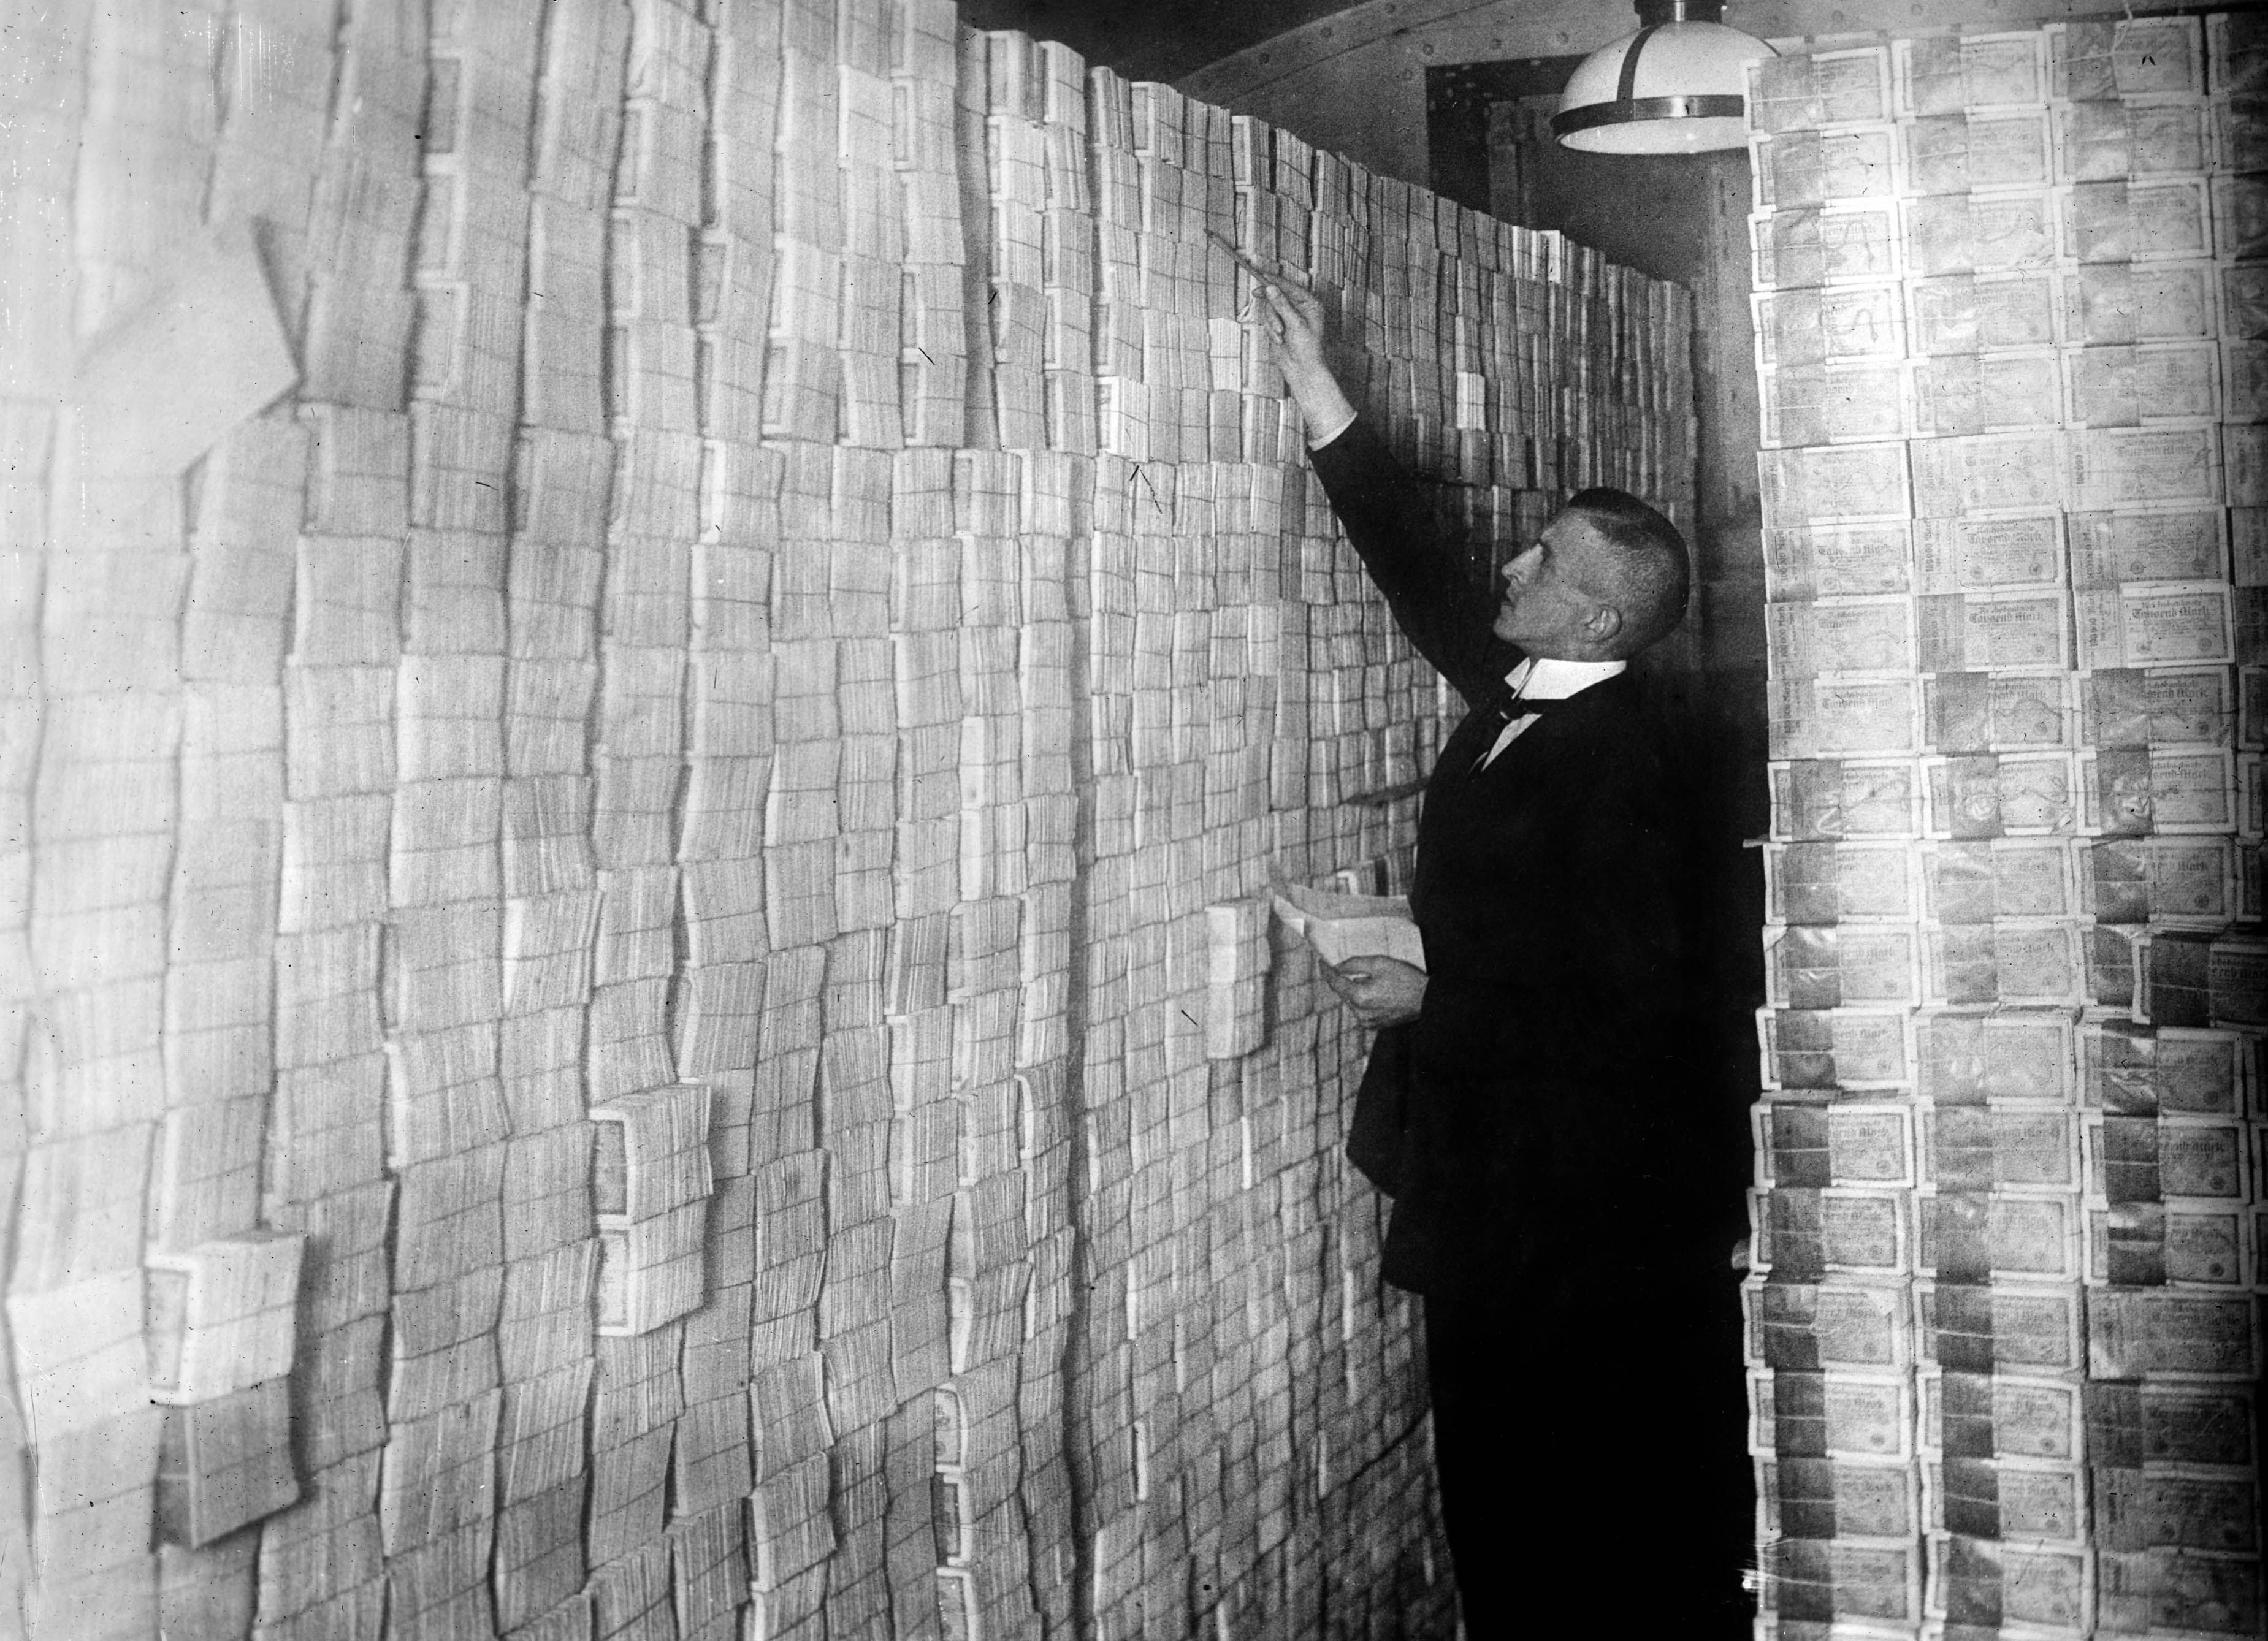 Stacks of banknotes in a Berlin bank during the hyperinflation in 1920s Germany